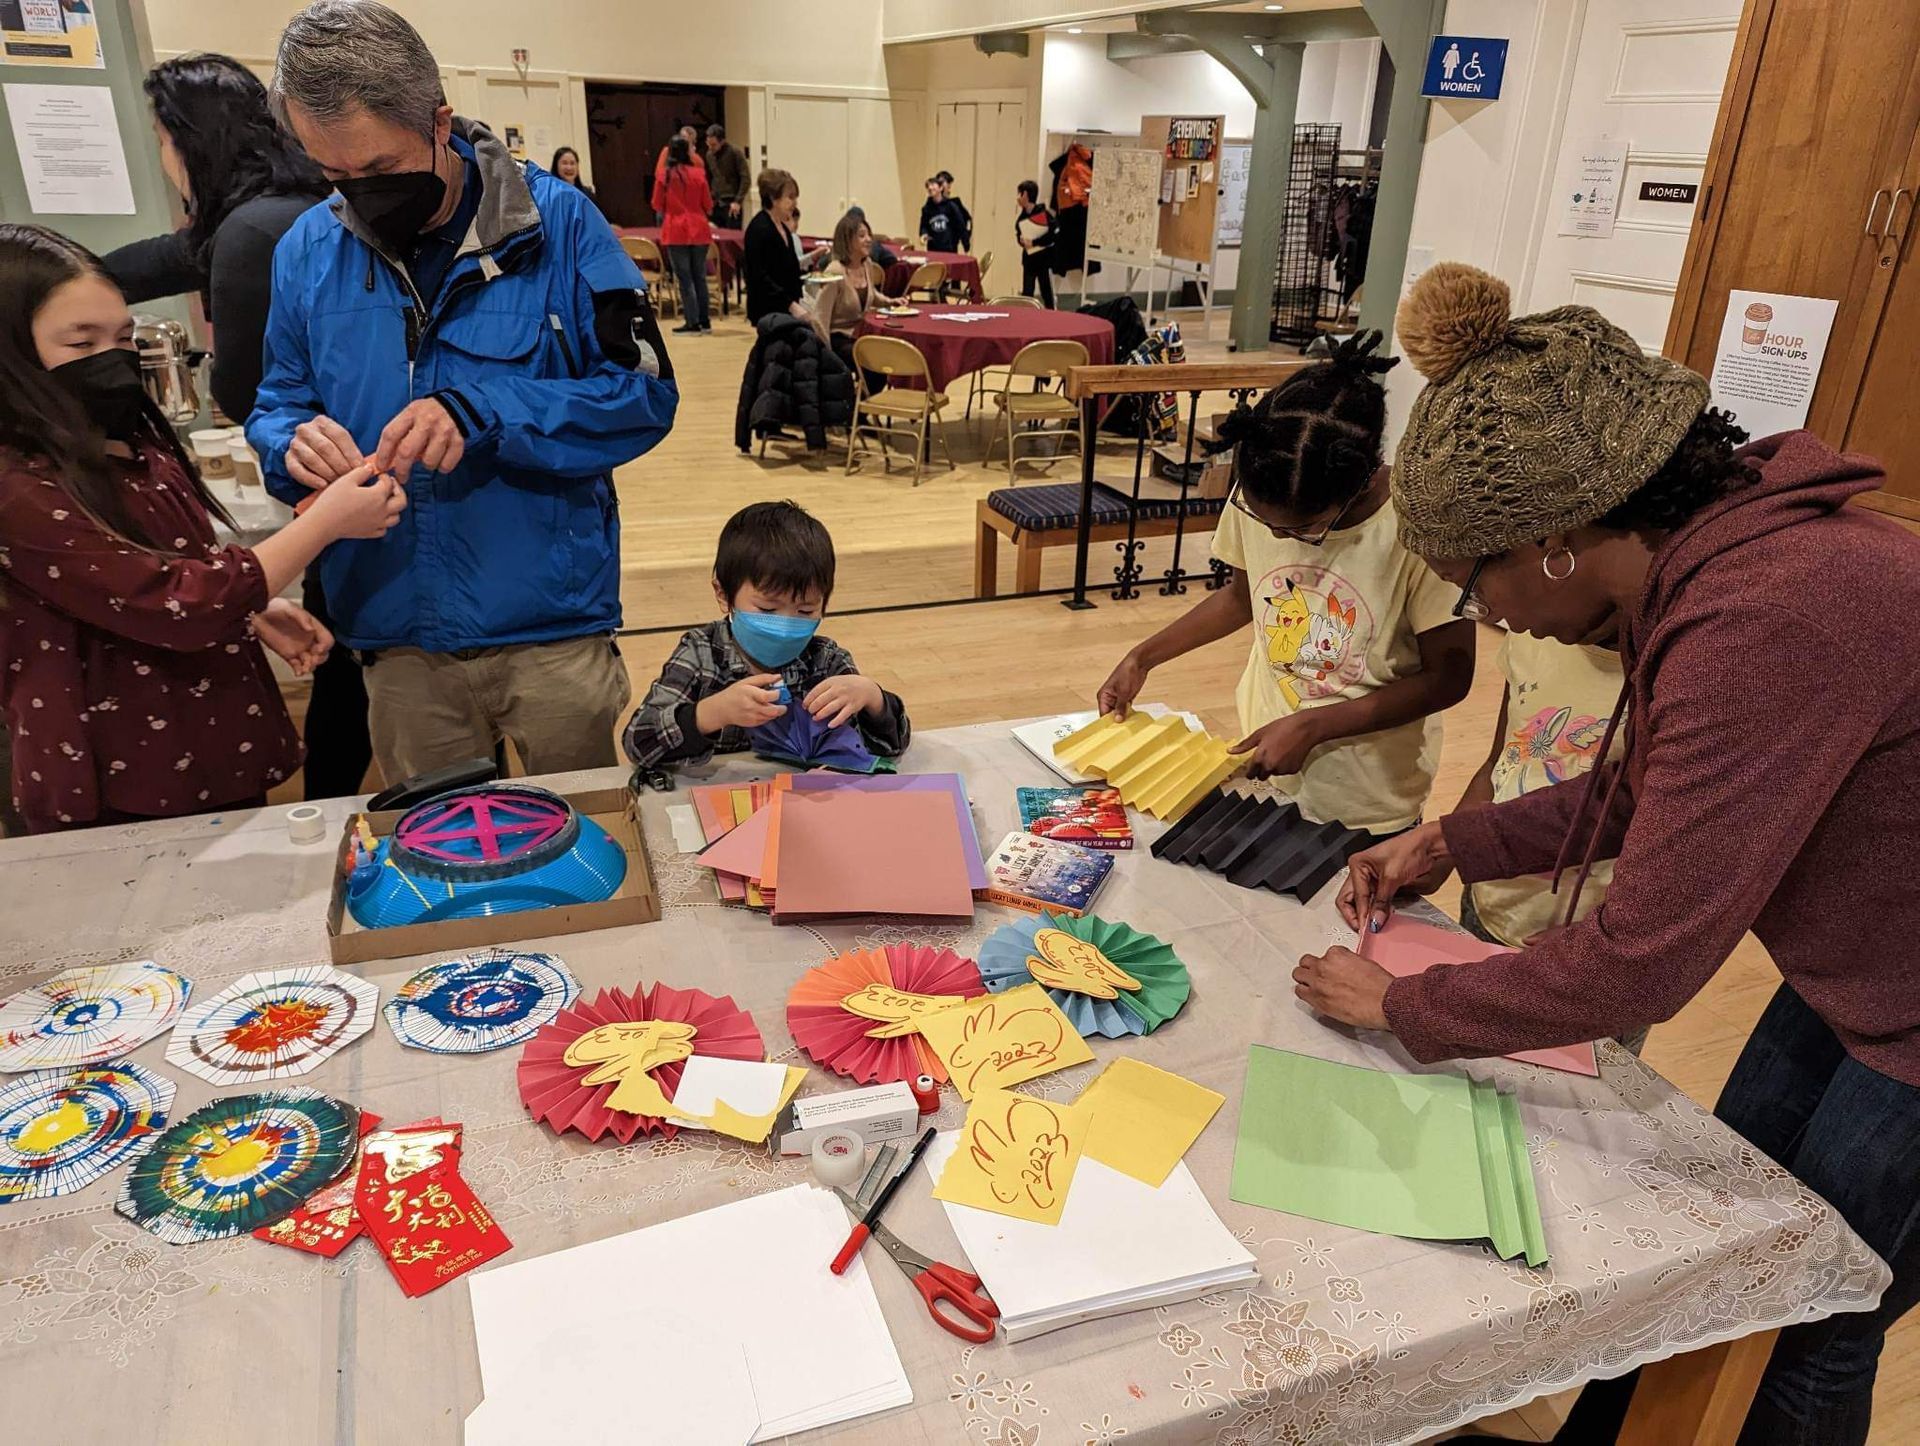 A group of people are sitting around a table making crafts.